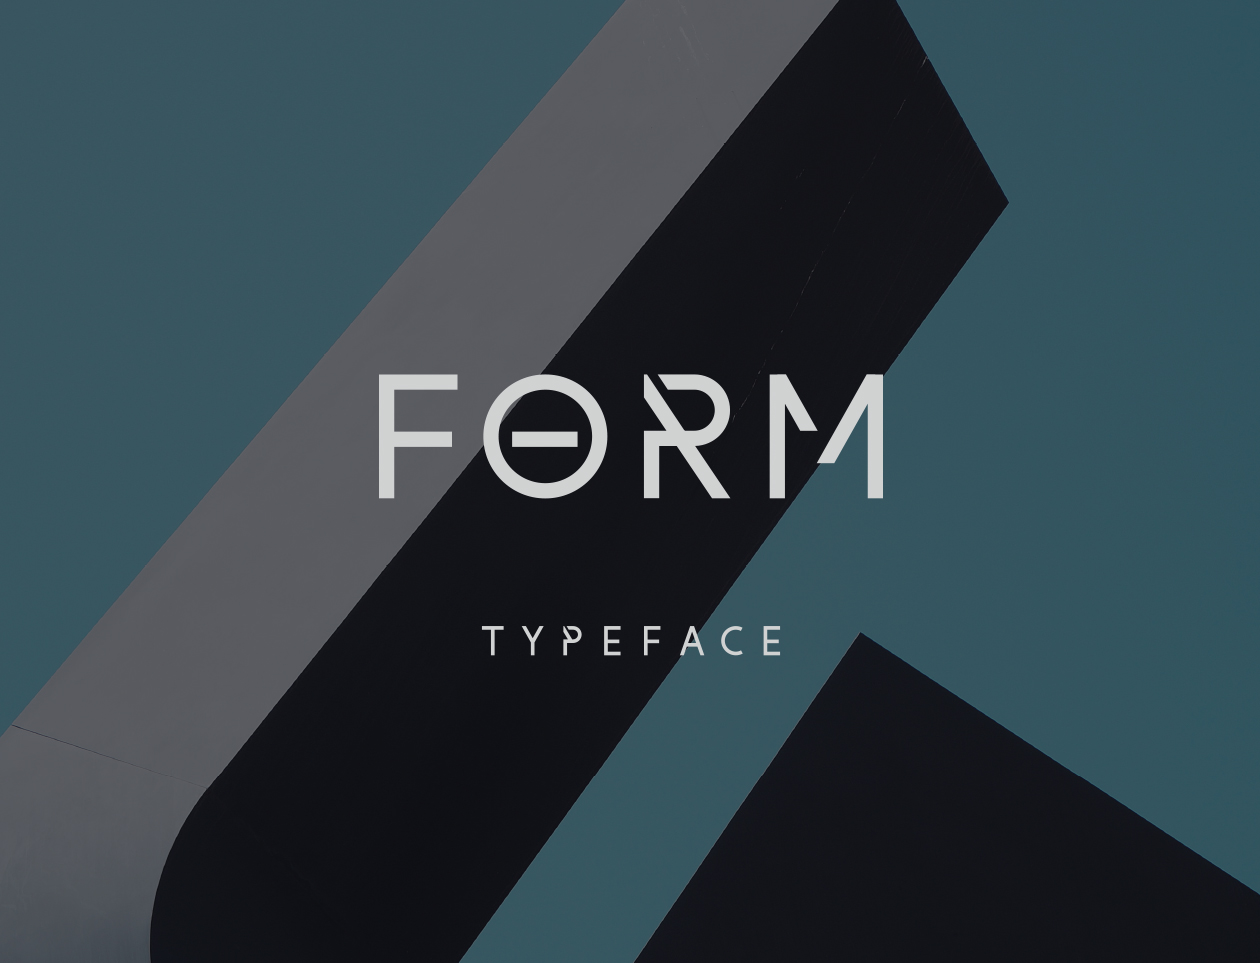 A free modern display typeface